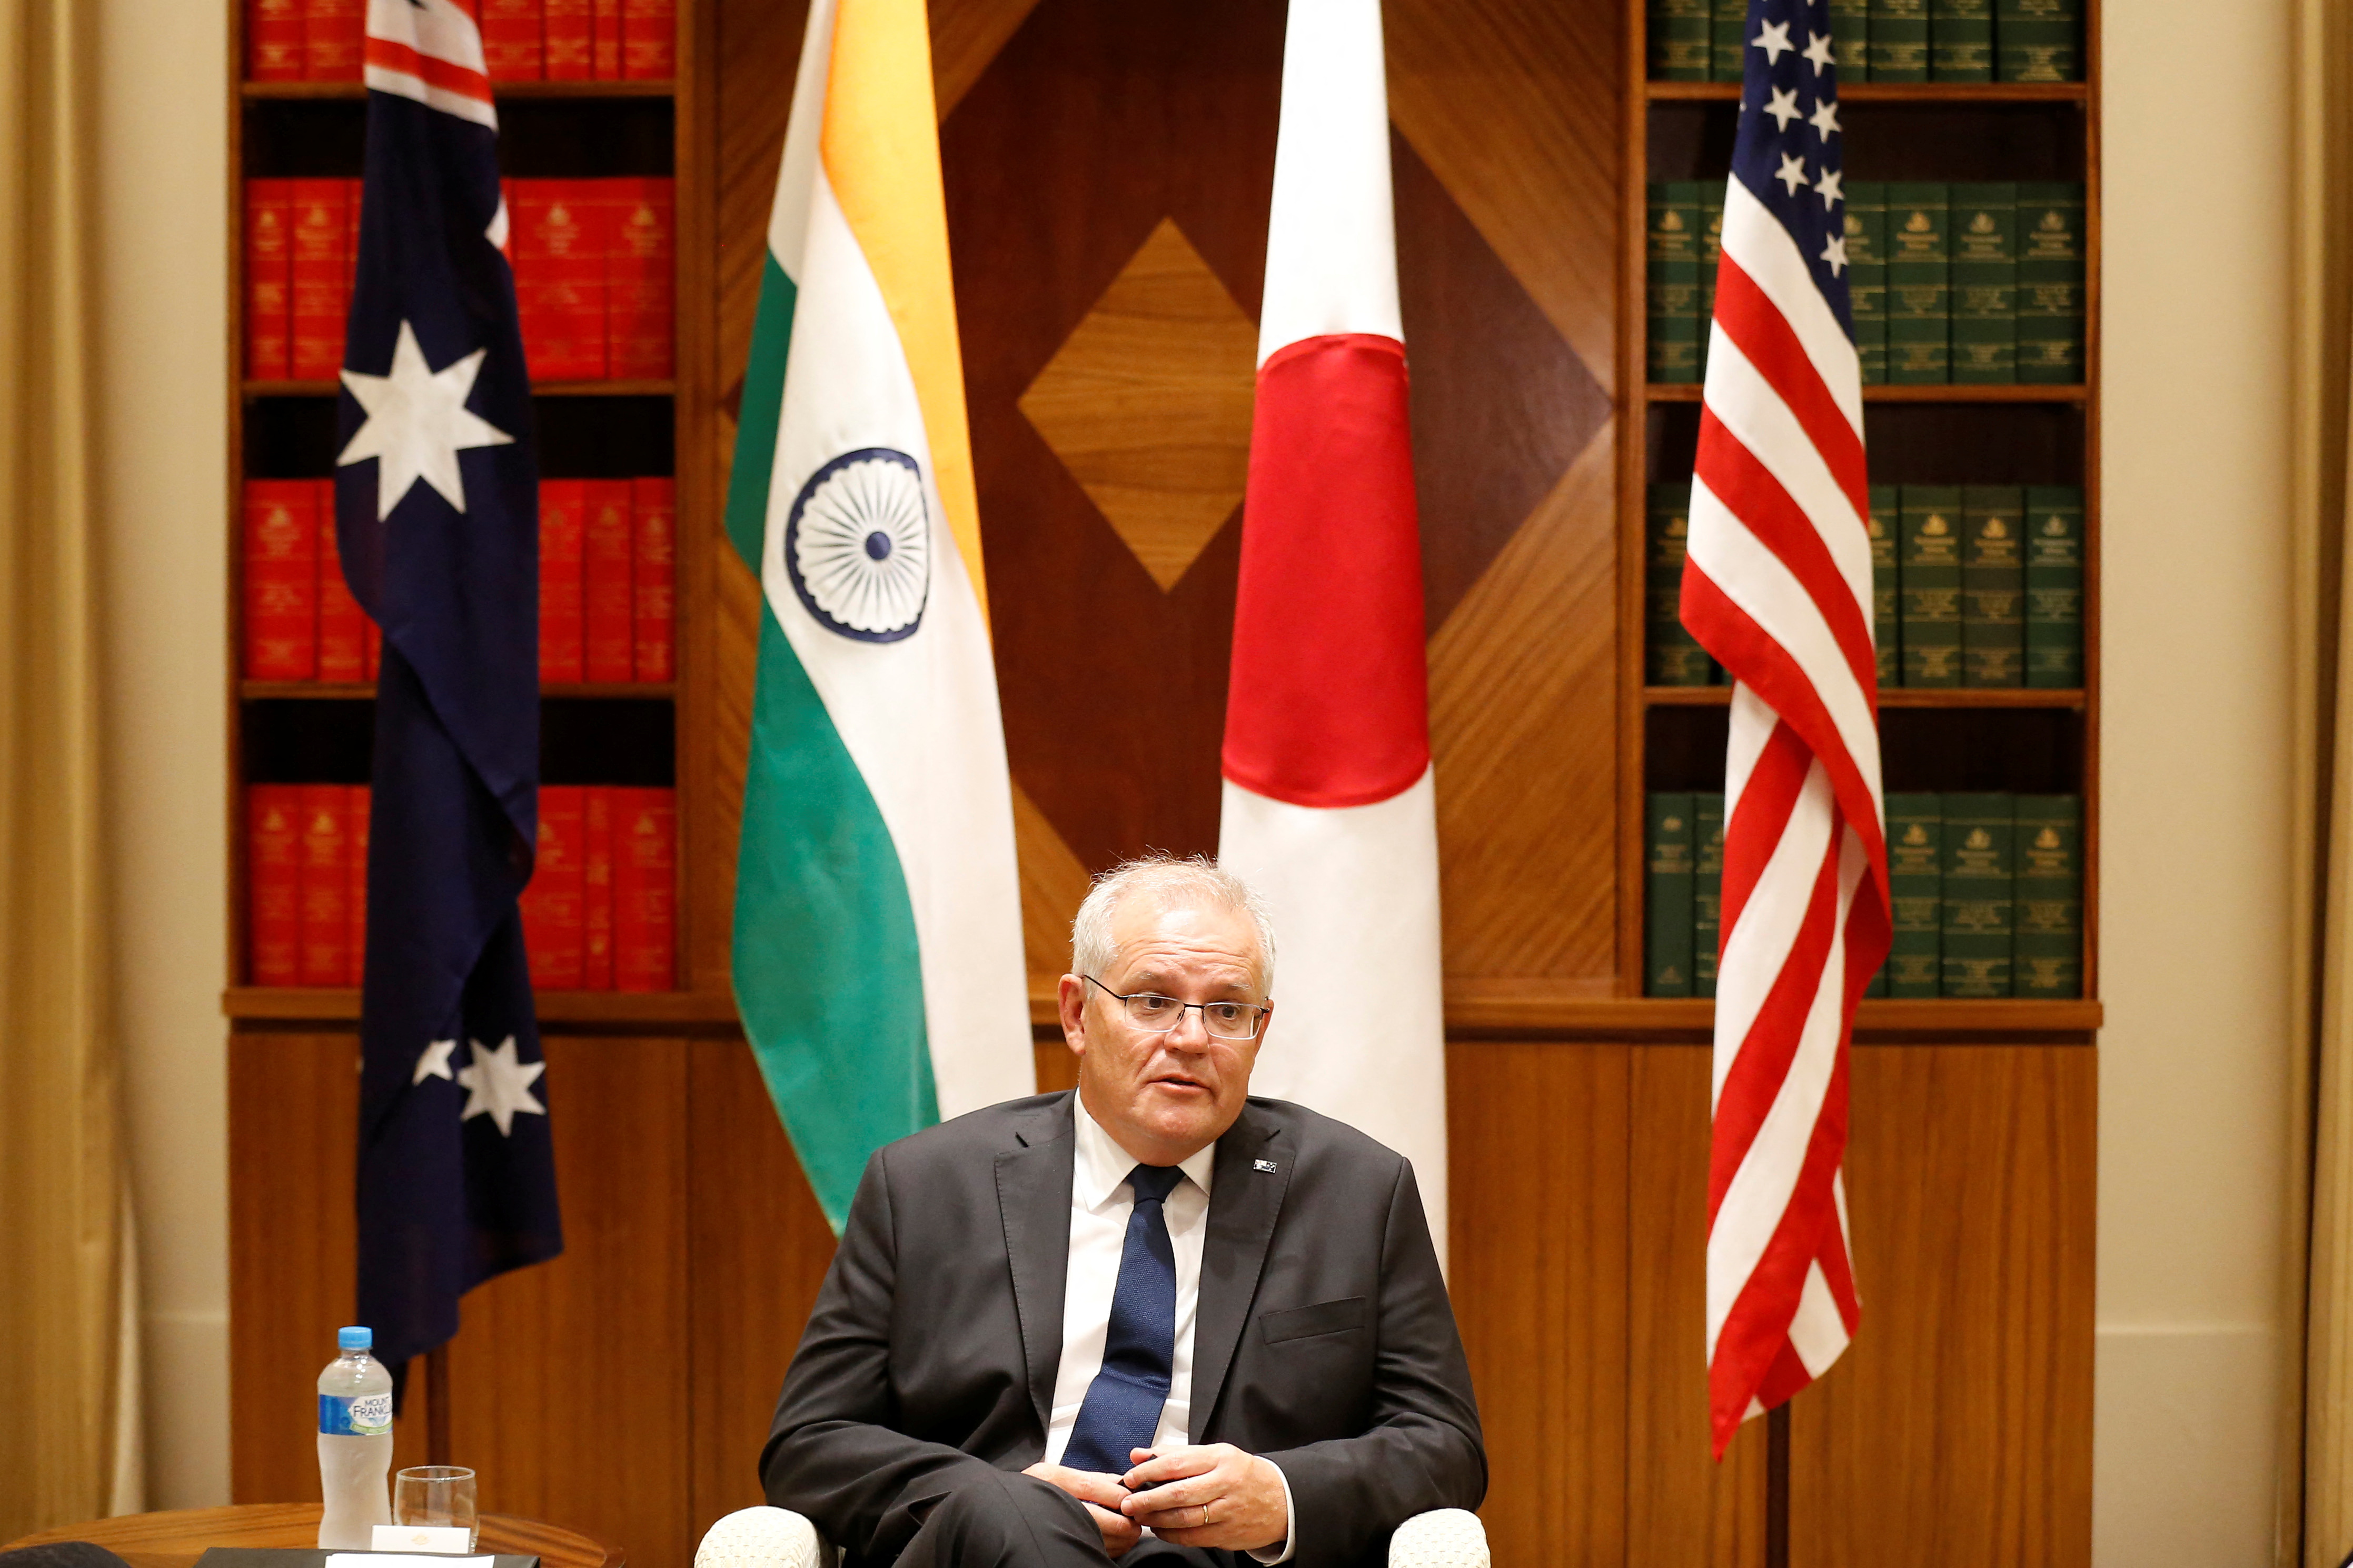 Australian Prime Minister Scott Morrison speaks to the media at Melbourne Commonwealth Parliament Office, in Melbourne, Australia February 11, 2022. Darrian Traynor / Pool via REUTERS